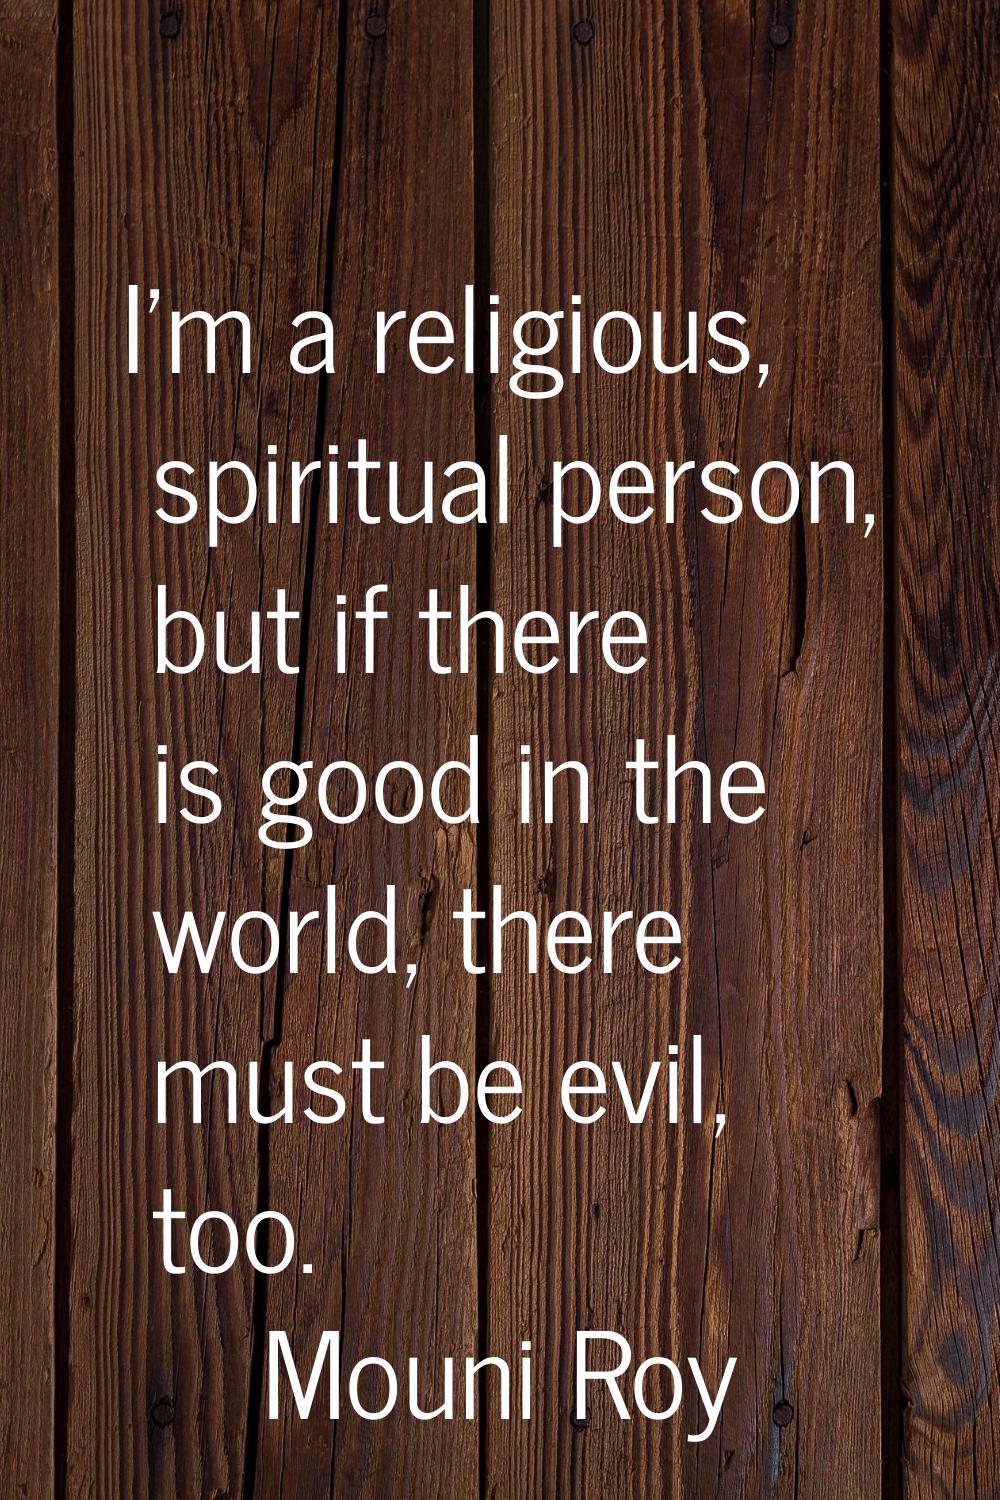 I'm a religious, spiritual person, but if there is good in the world, there must be evil, too.